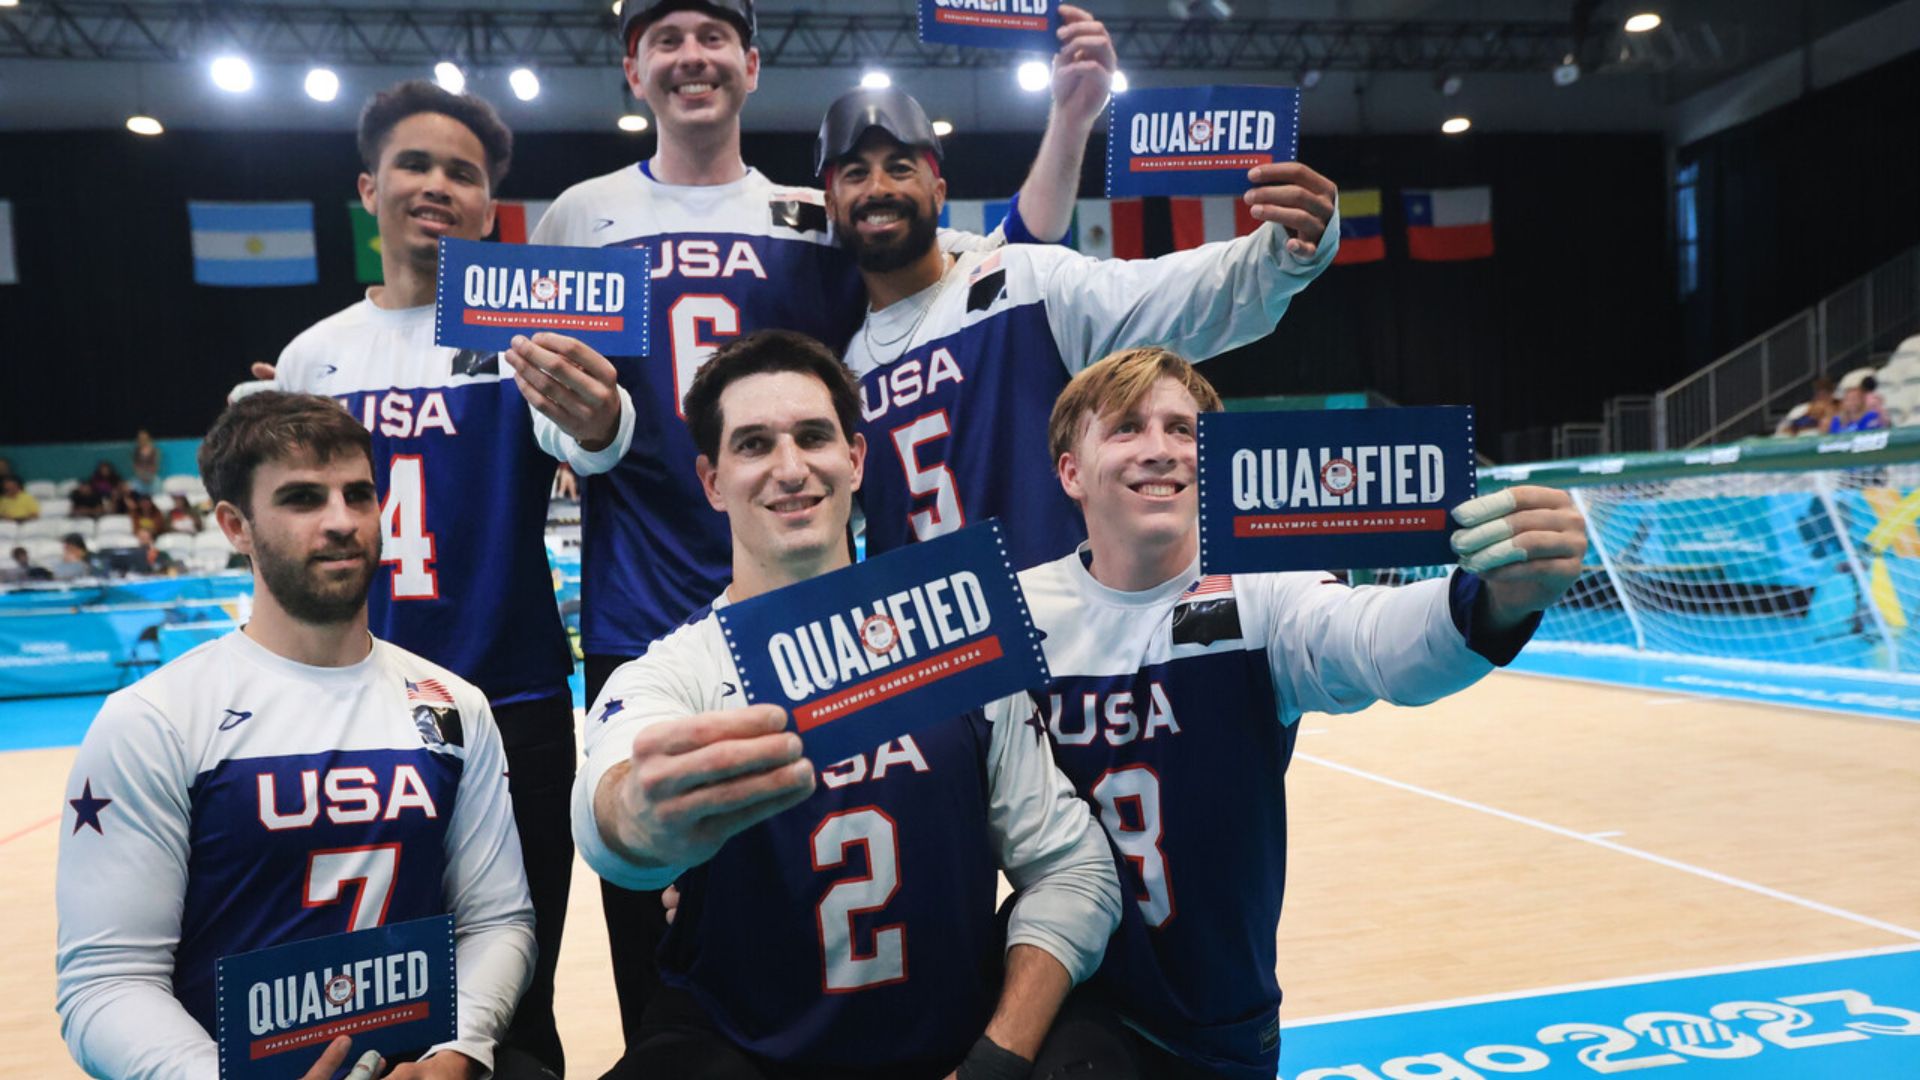 Goalball: Two Finals with the North American Touch